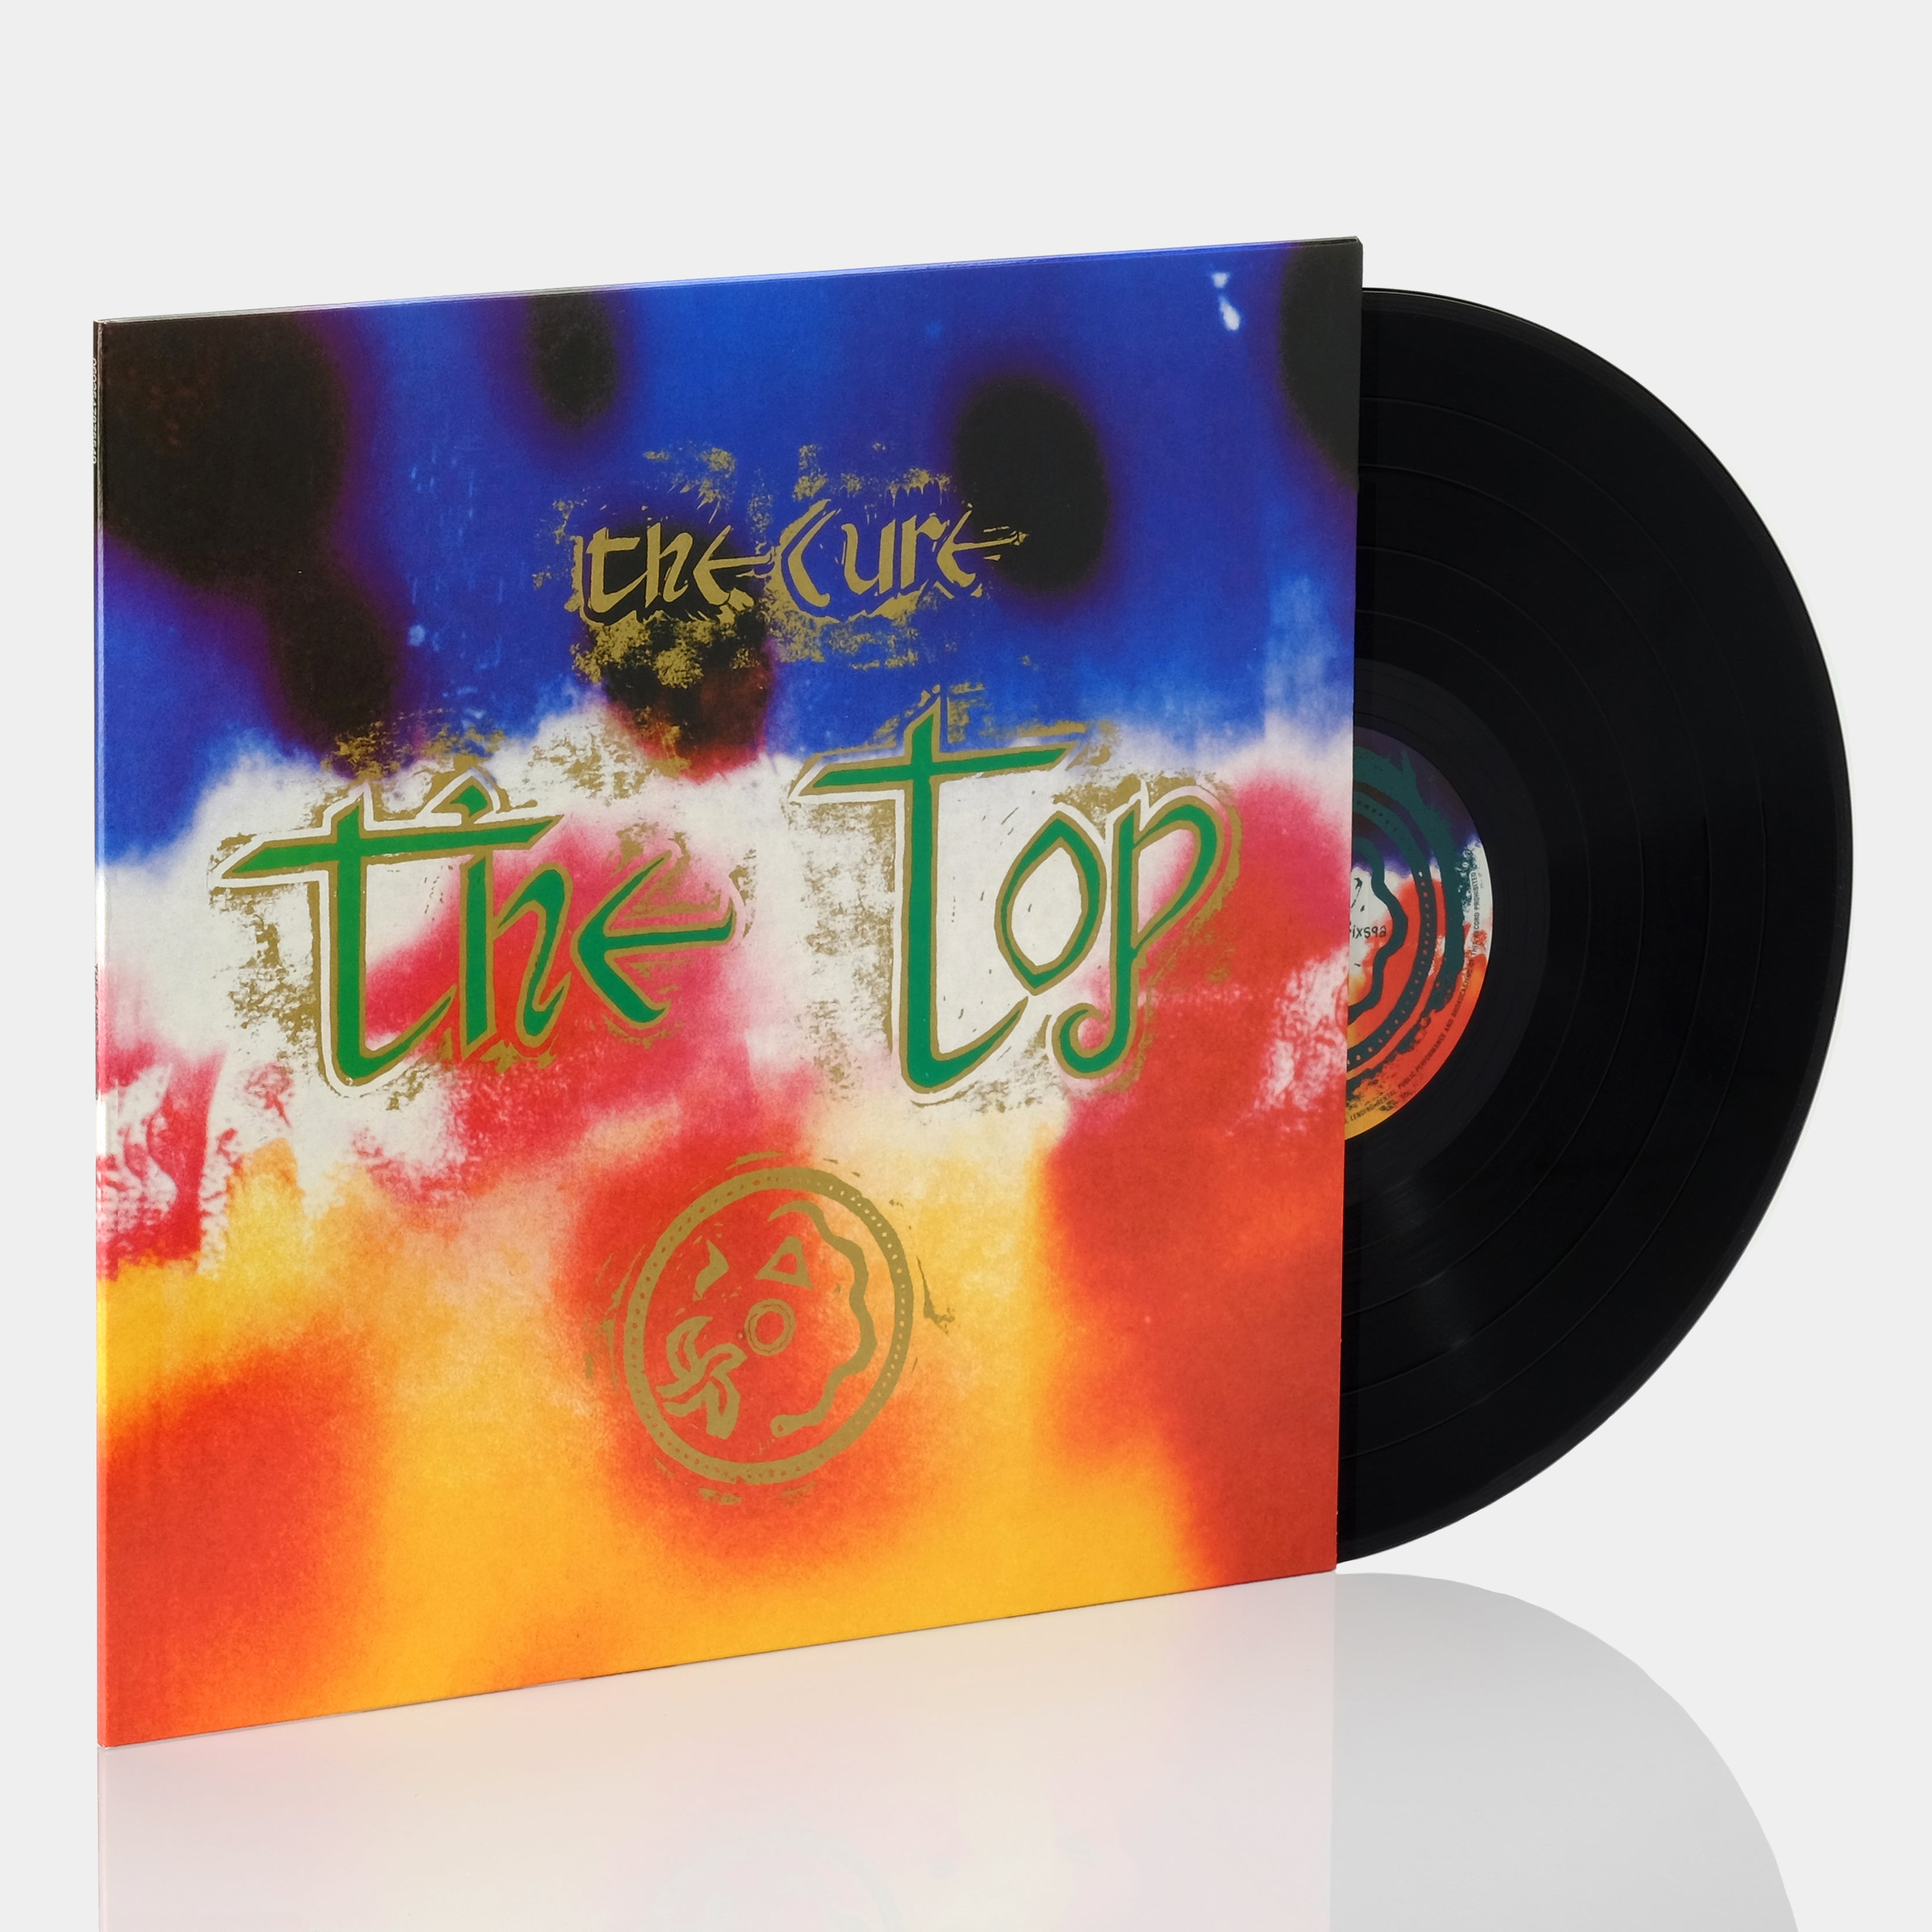 The Cure - The Top LP Vinyl Record